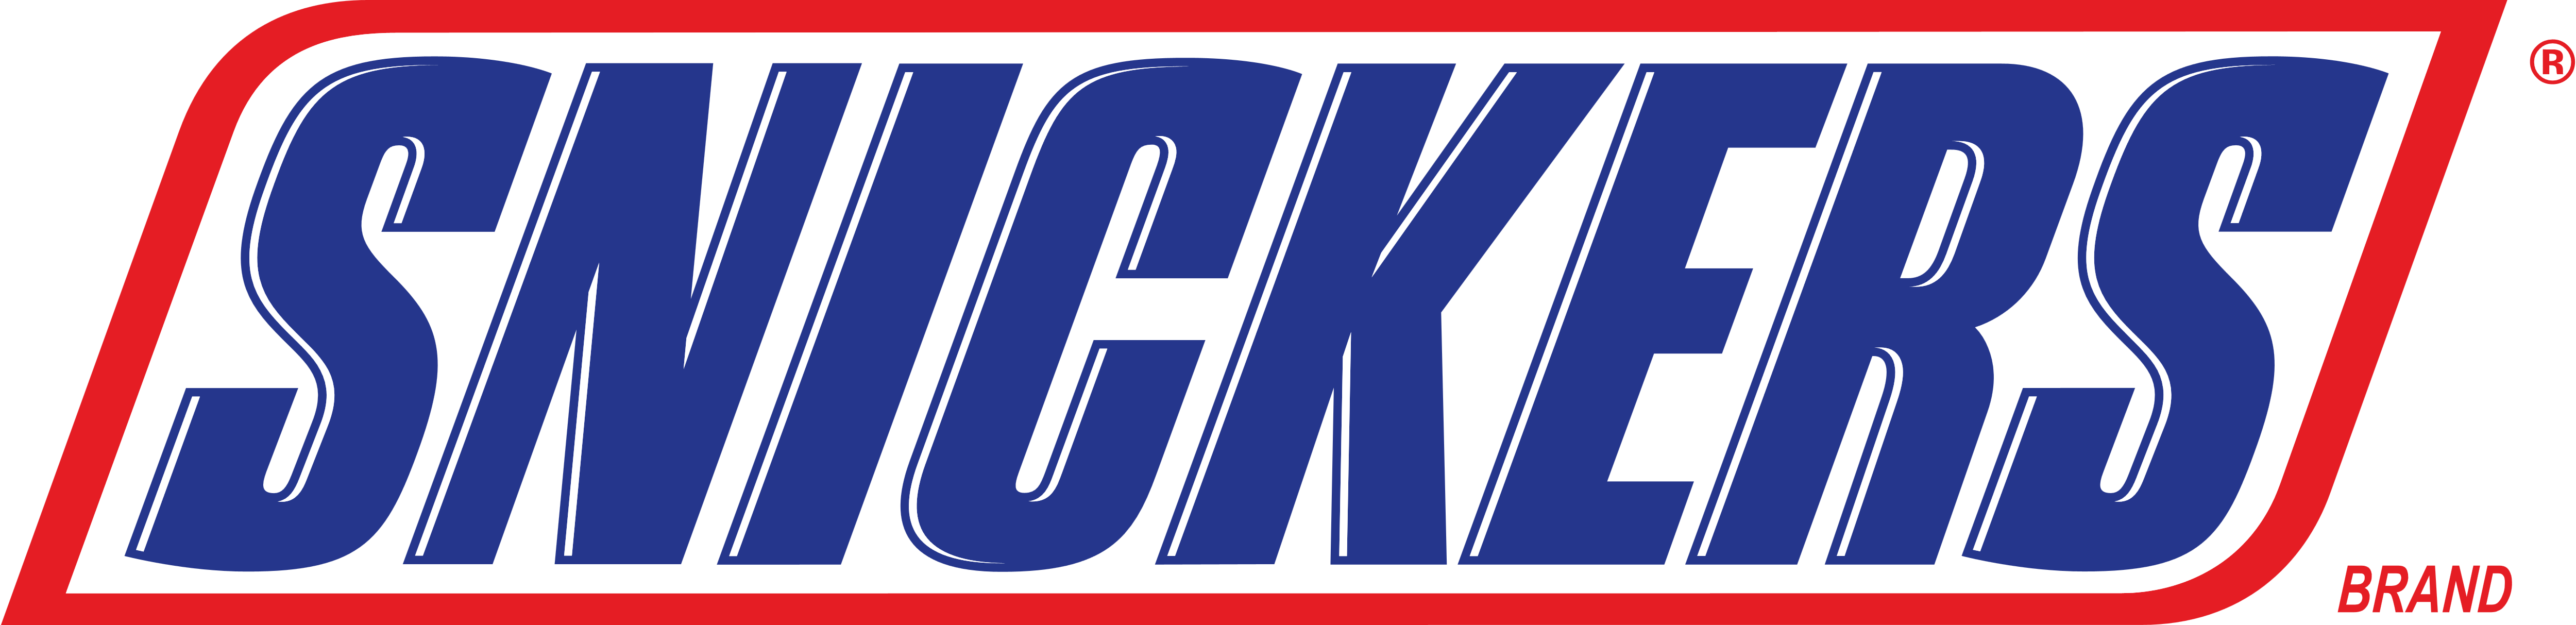 Snickers Logos